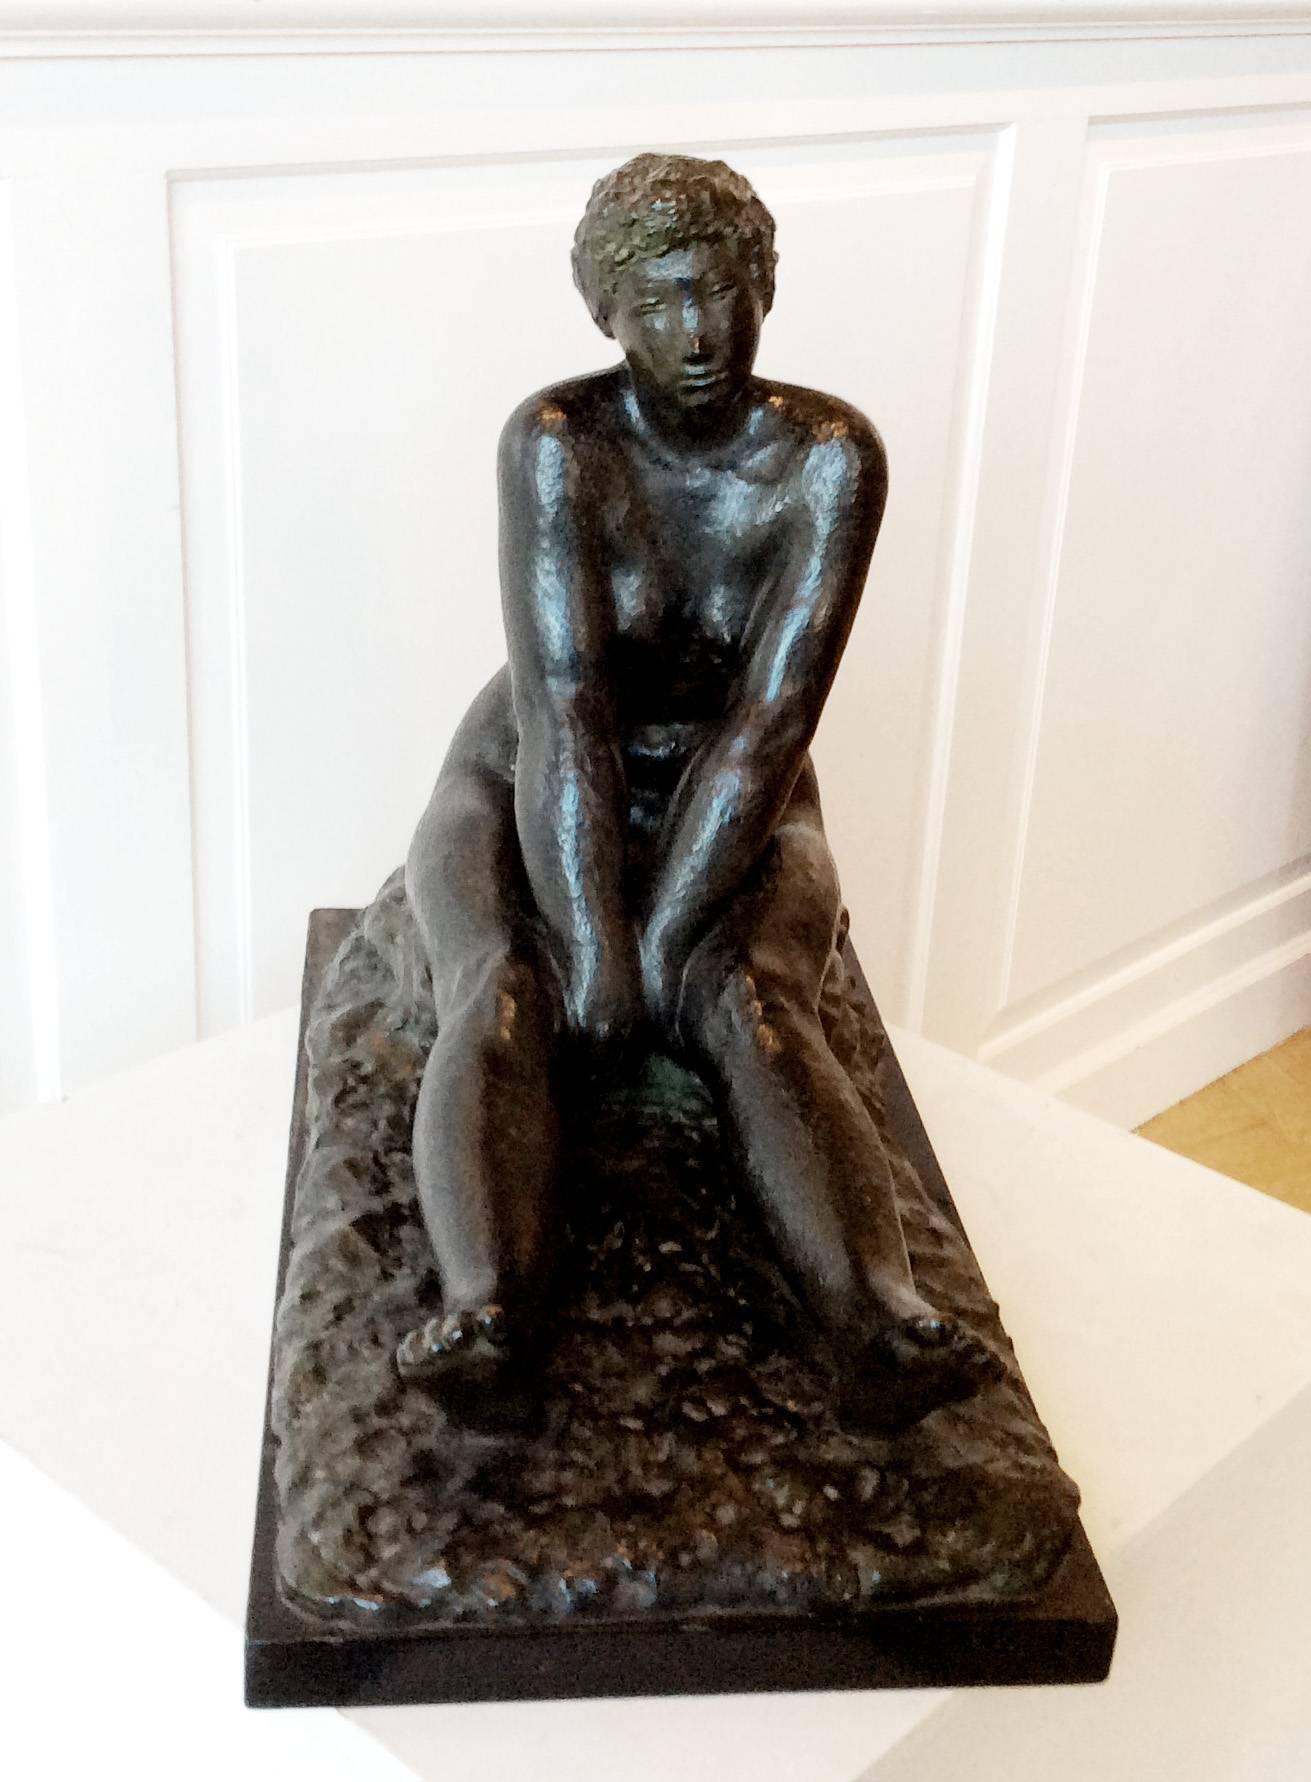 Large sitting nude model - Sculpture by Gerhard Henning